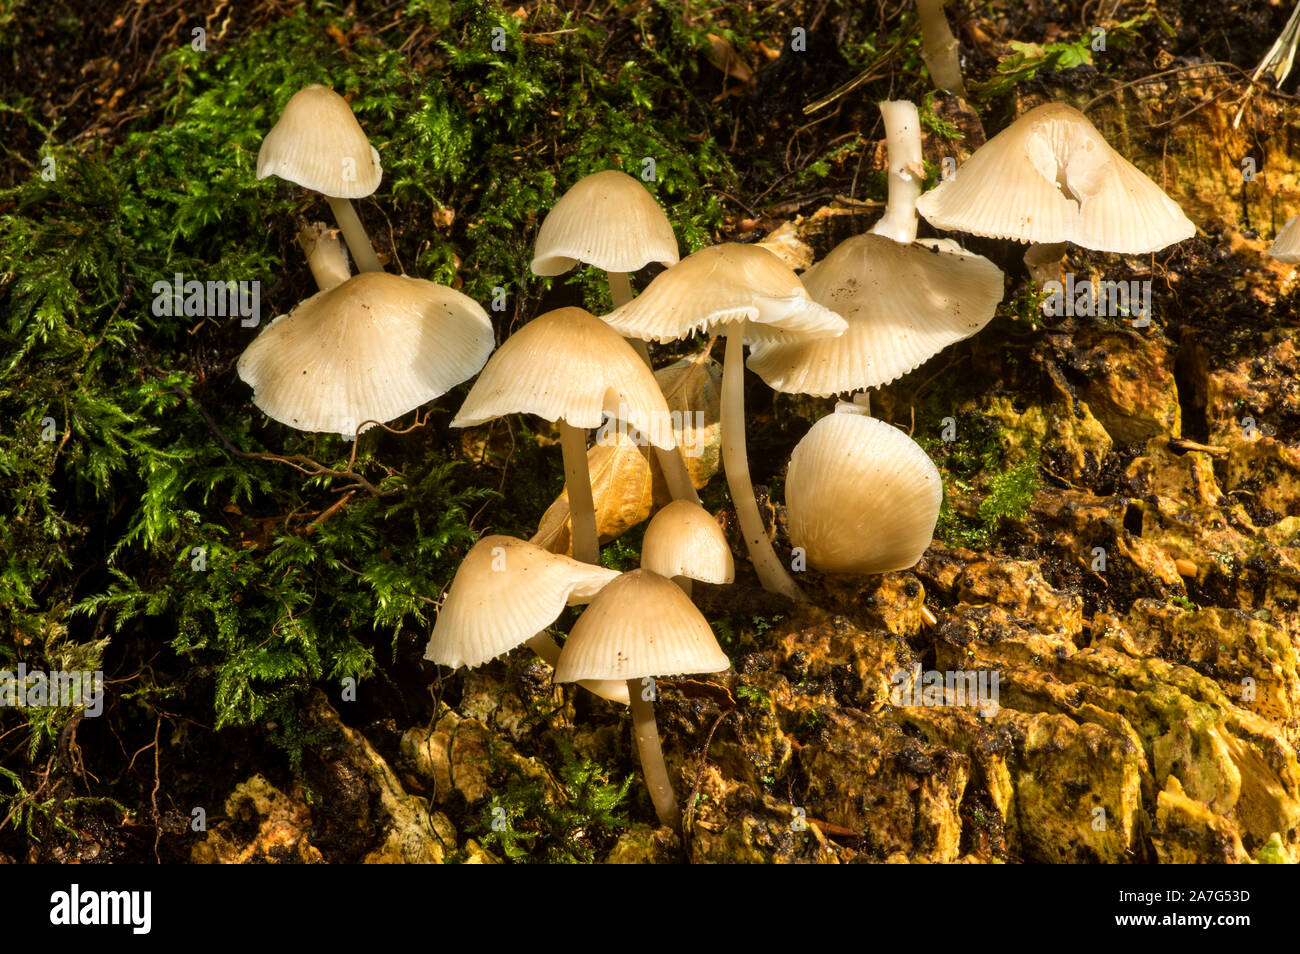 A common mushroom ffound as in this case on hardwood tree stumps Stock Photo